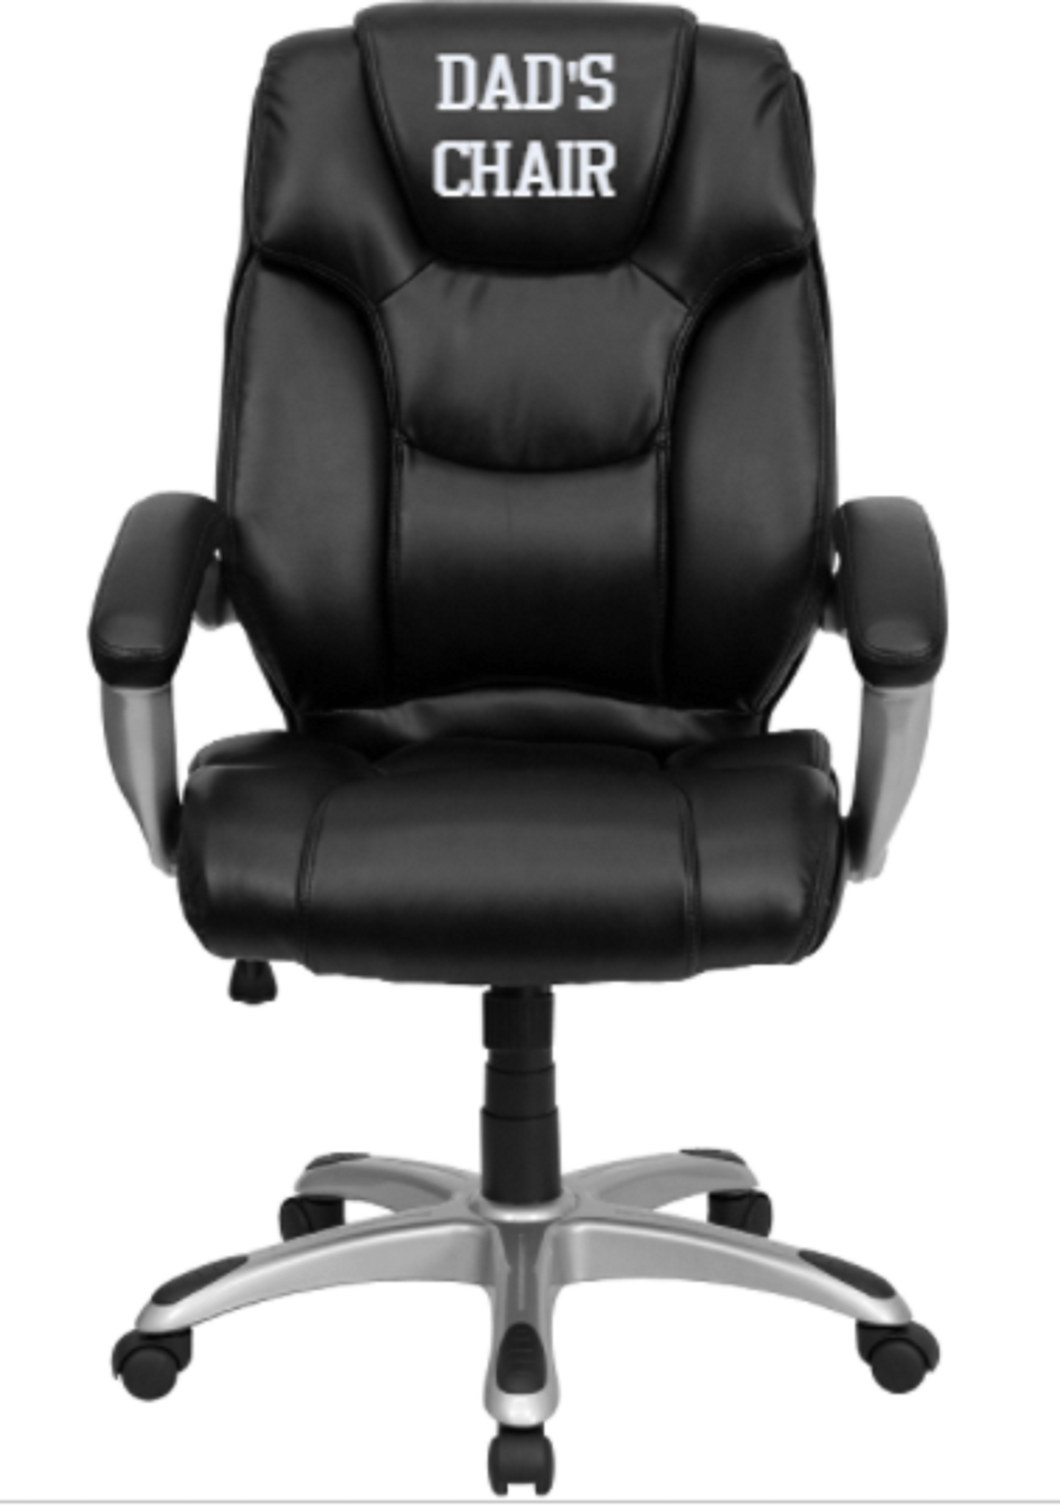 Custom Designed Silver Base Executive Office Chair With Your Personalized Name & Graphic